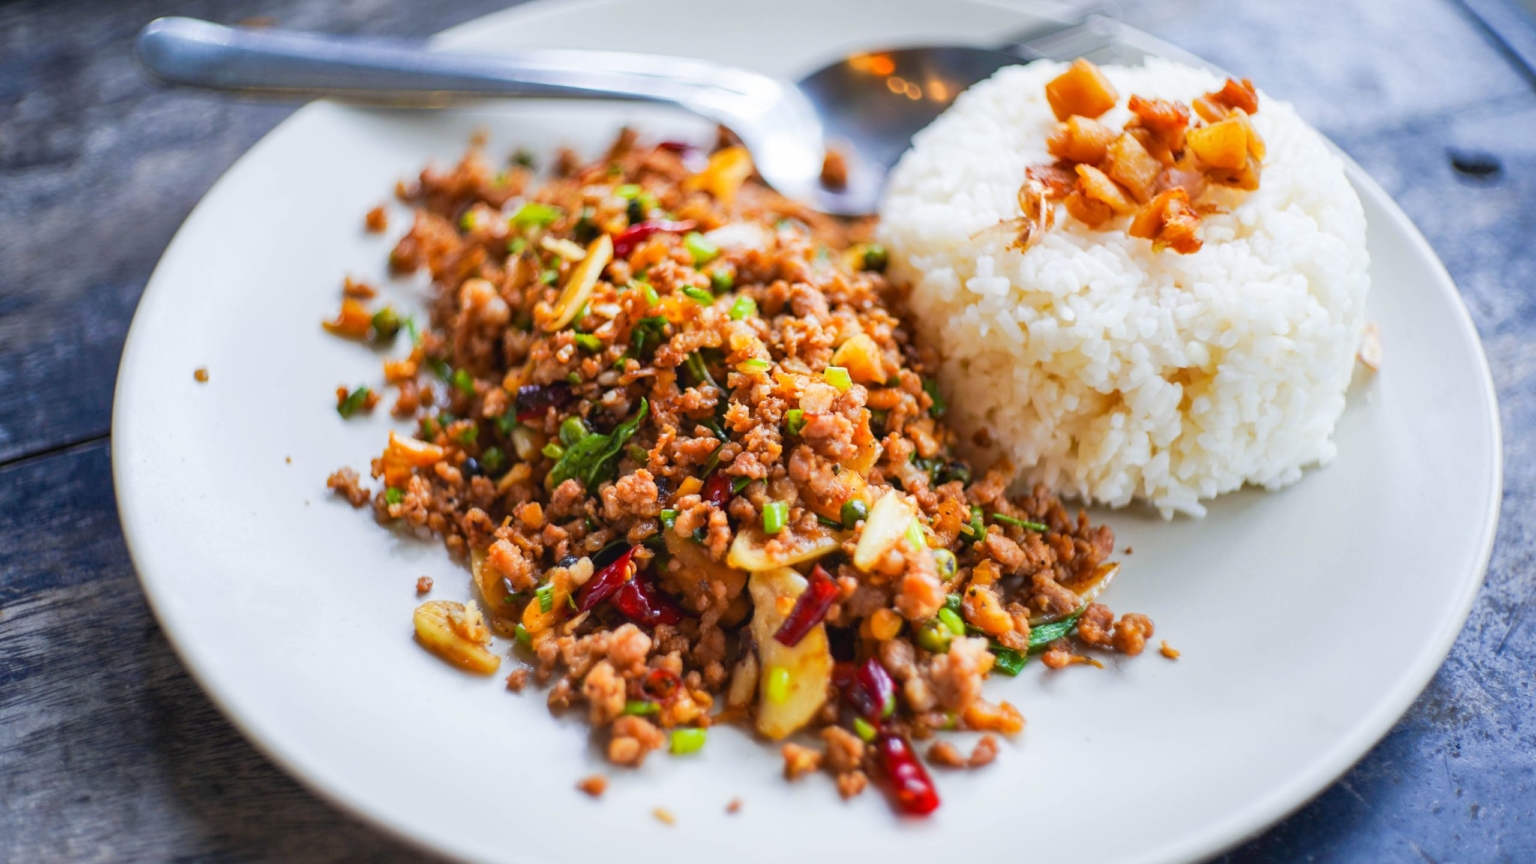 Spicy Thai Food 7 Awesome Dishes That Will Set Your Mouth On Fire The Best Thai Flower Mound